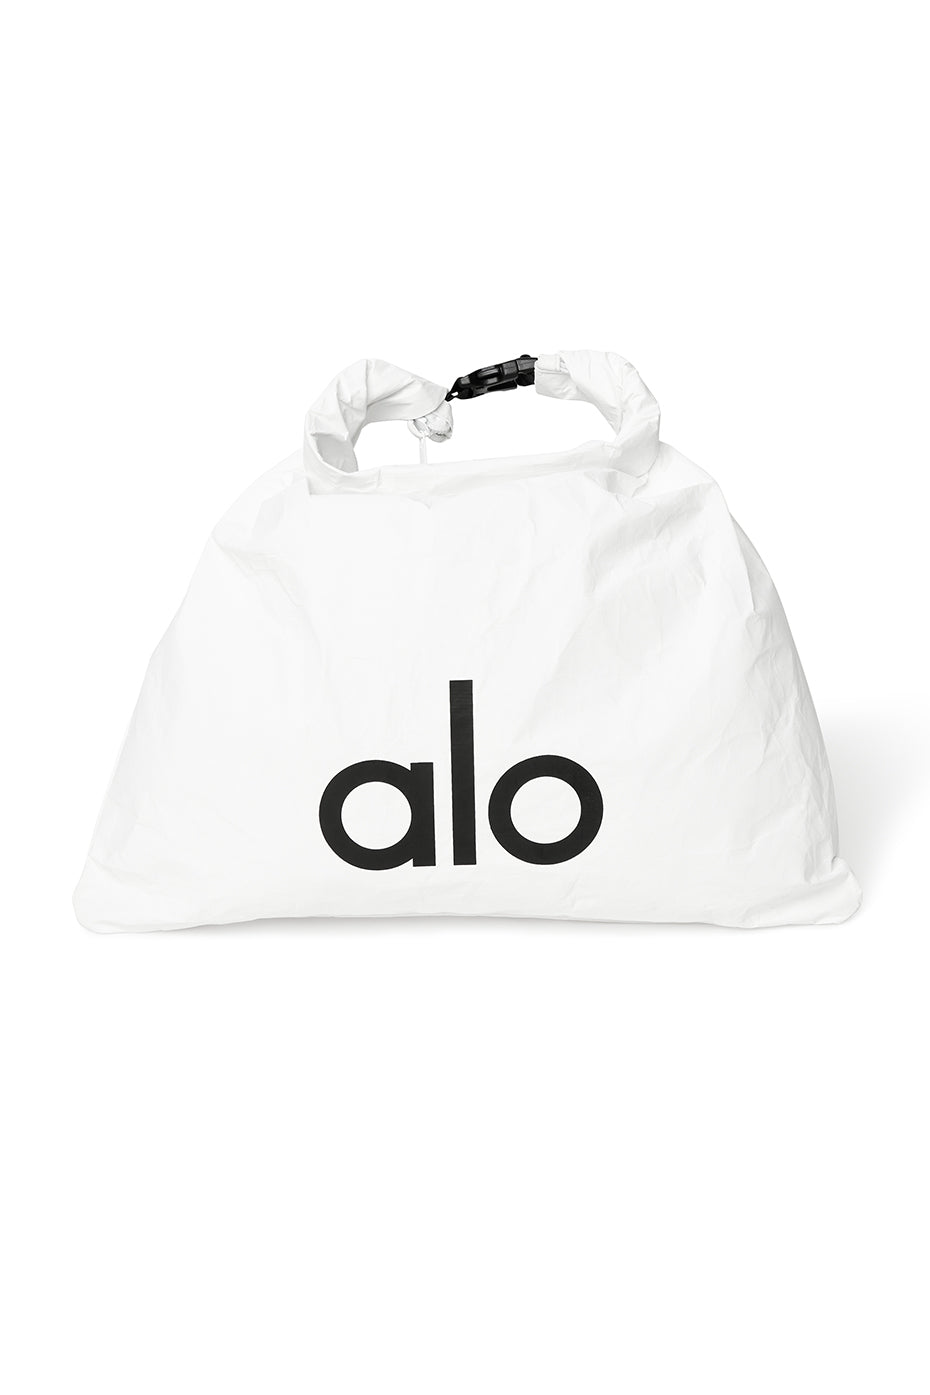 Keep It Dry Fitness Bag in White by Alo Yoga - International